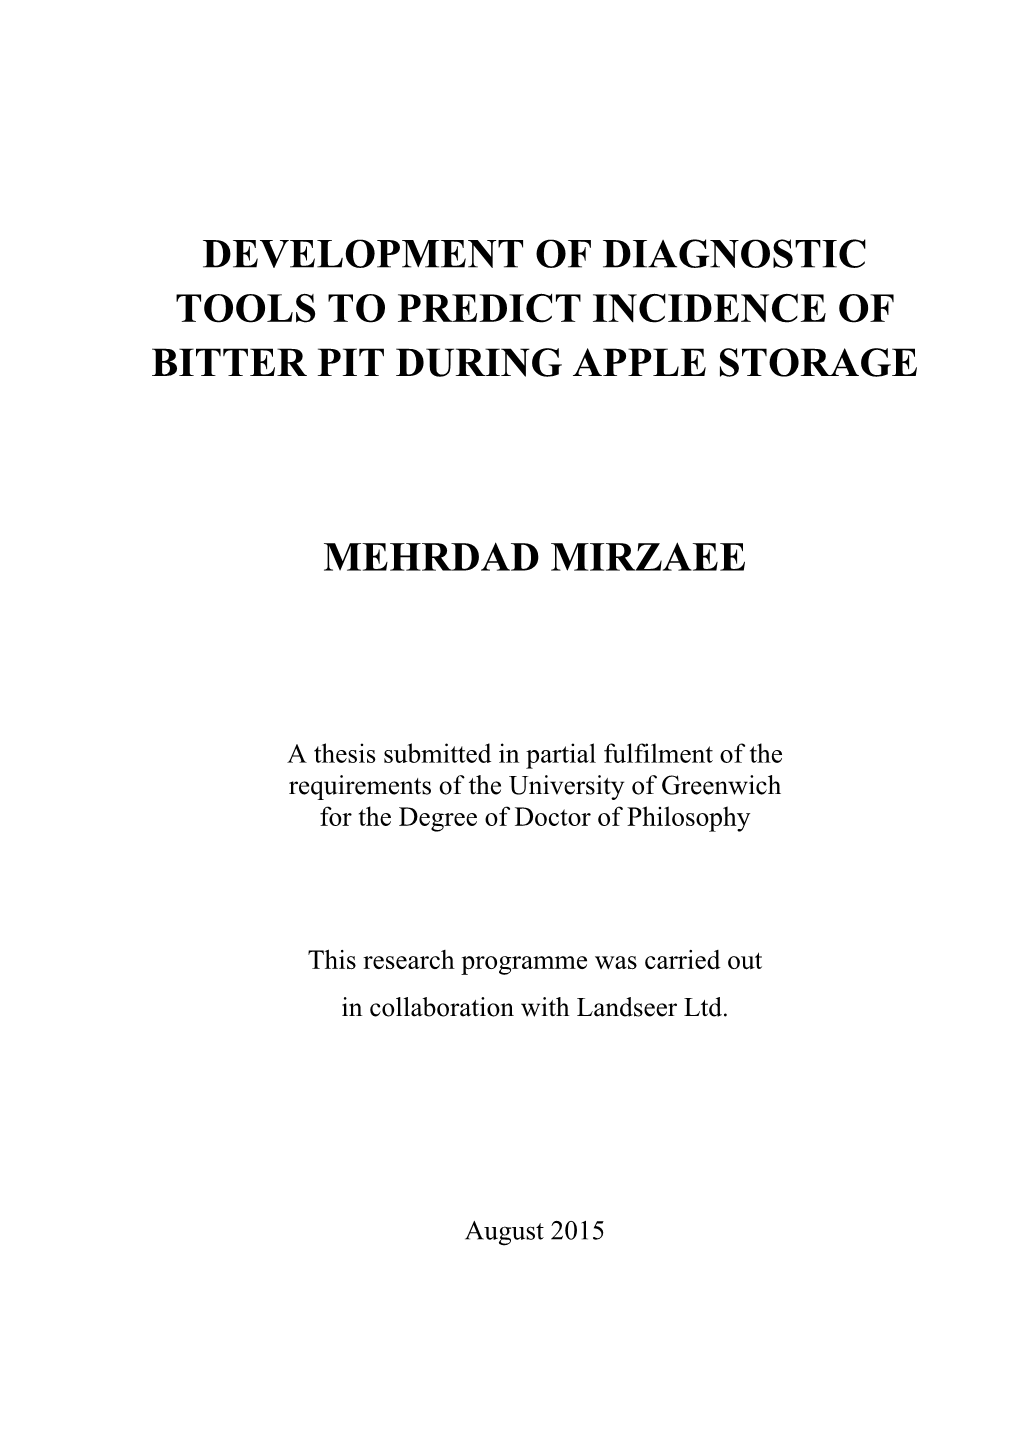 Development of Diagnostic Tools to Predict Incidence of Bitter Pit During Apple Storage